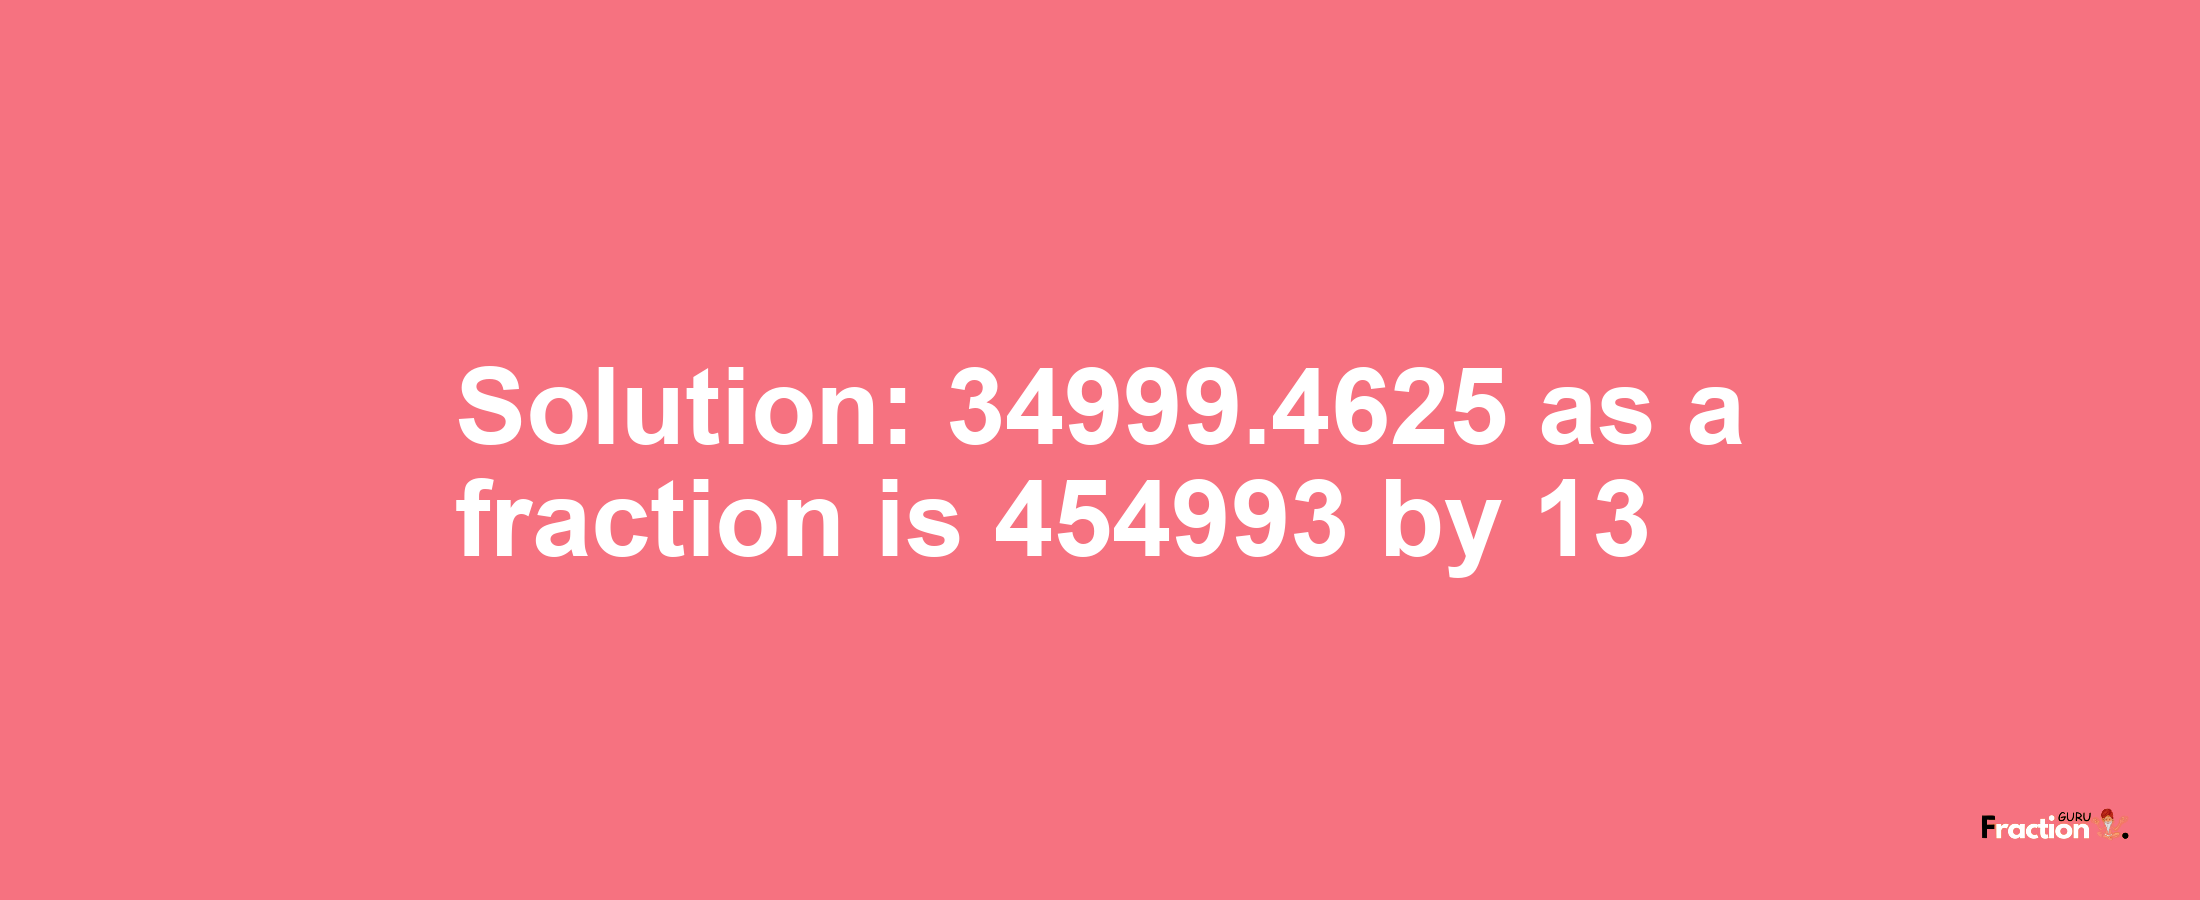 Solution:34999.4625 as a fraction is 454993/13